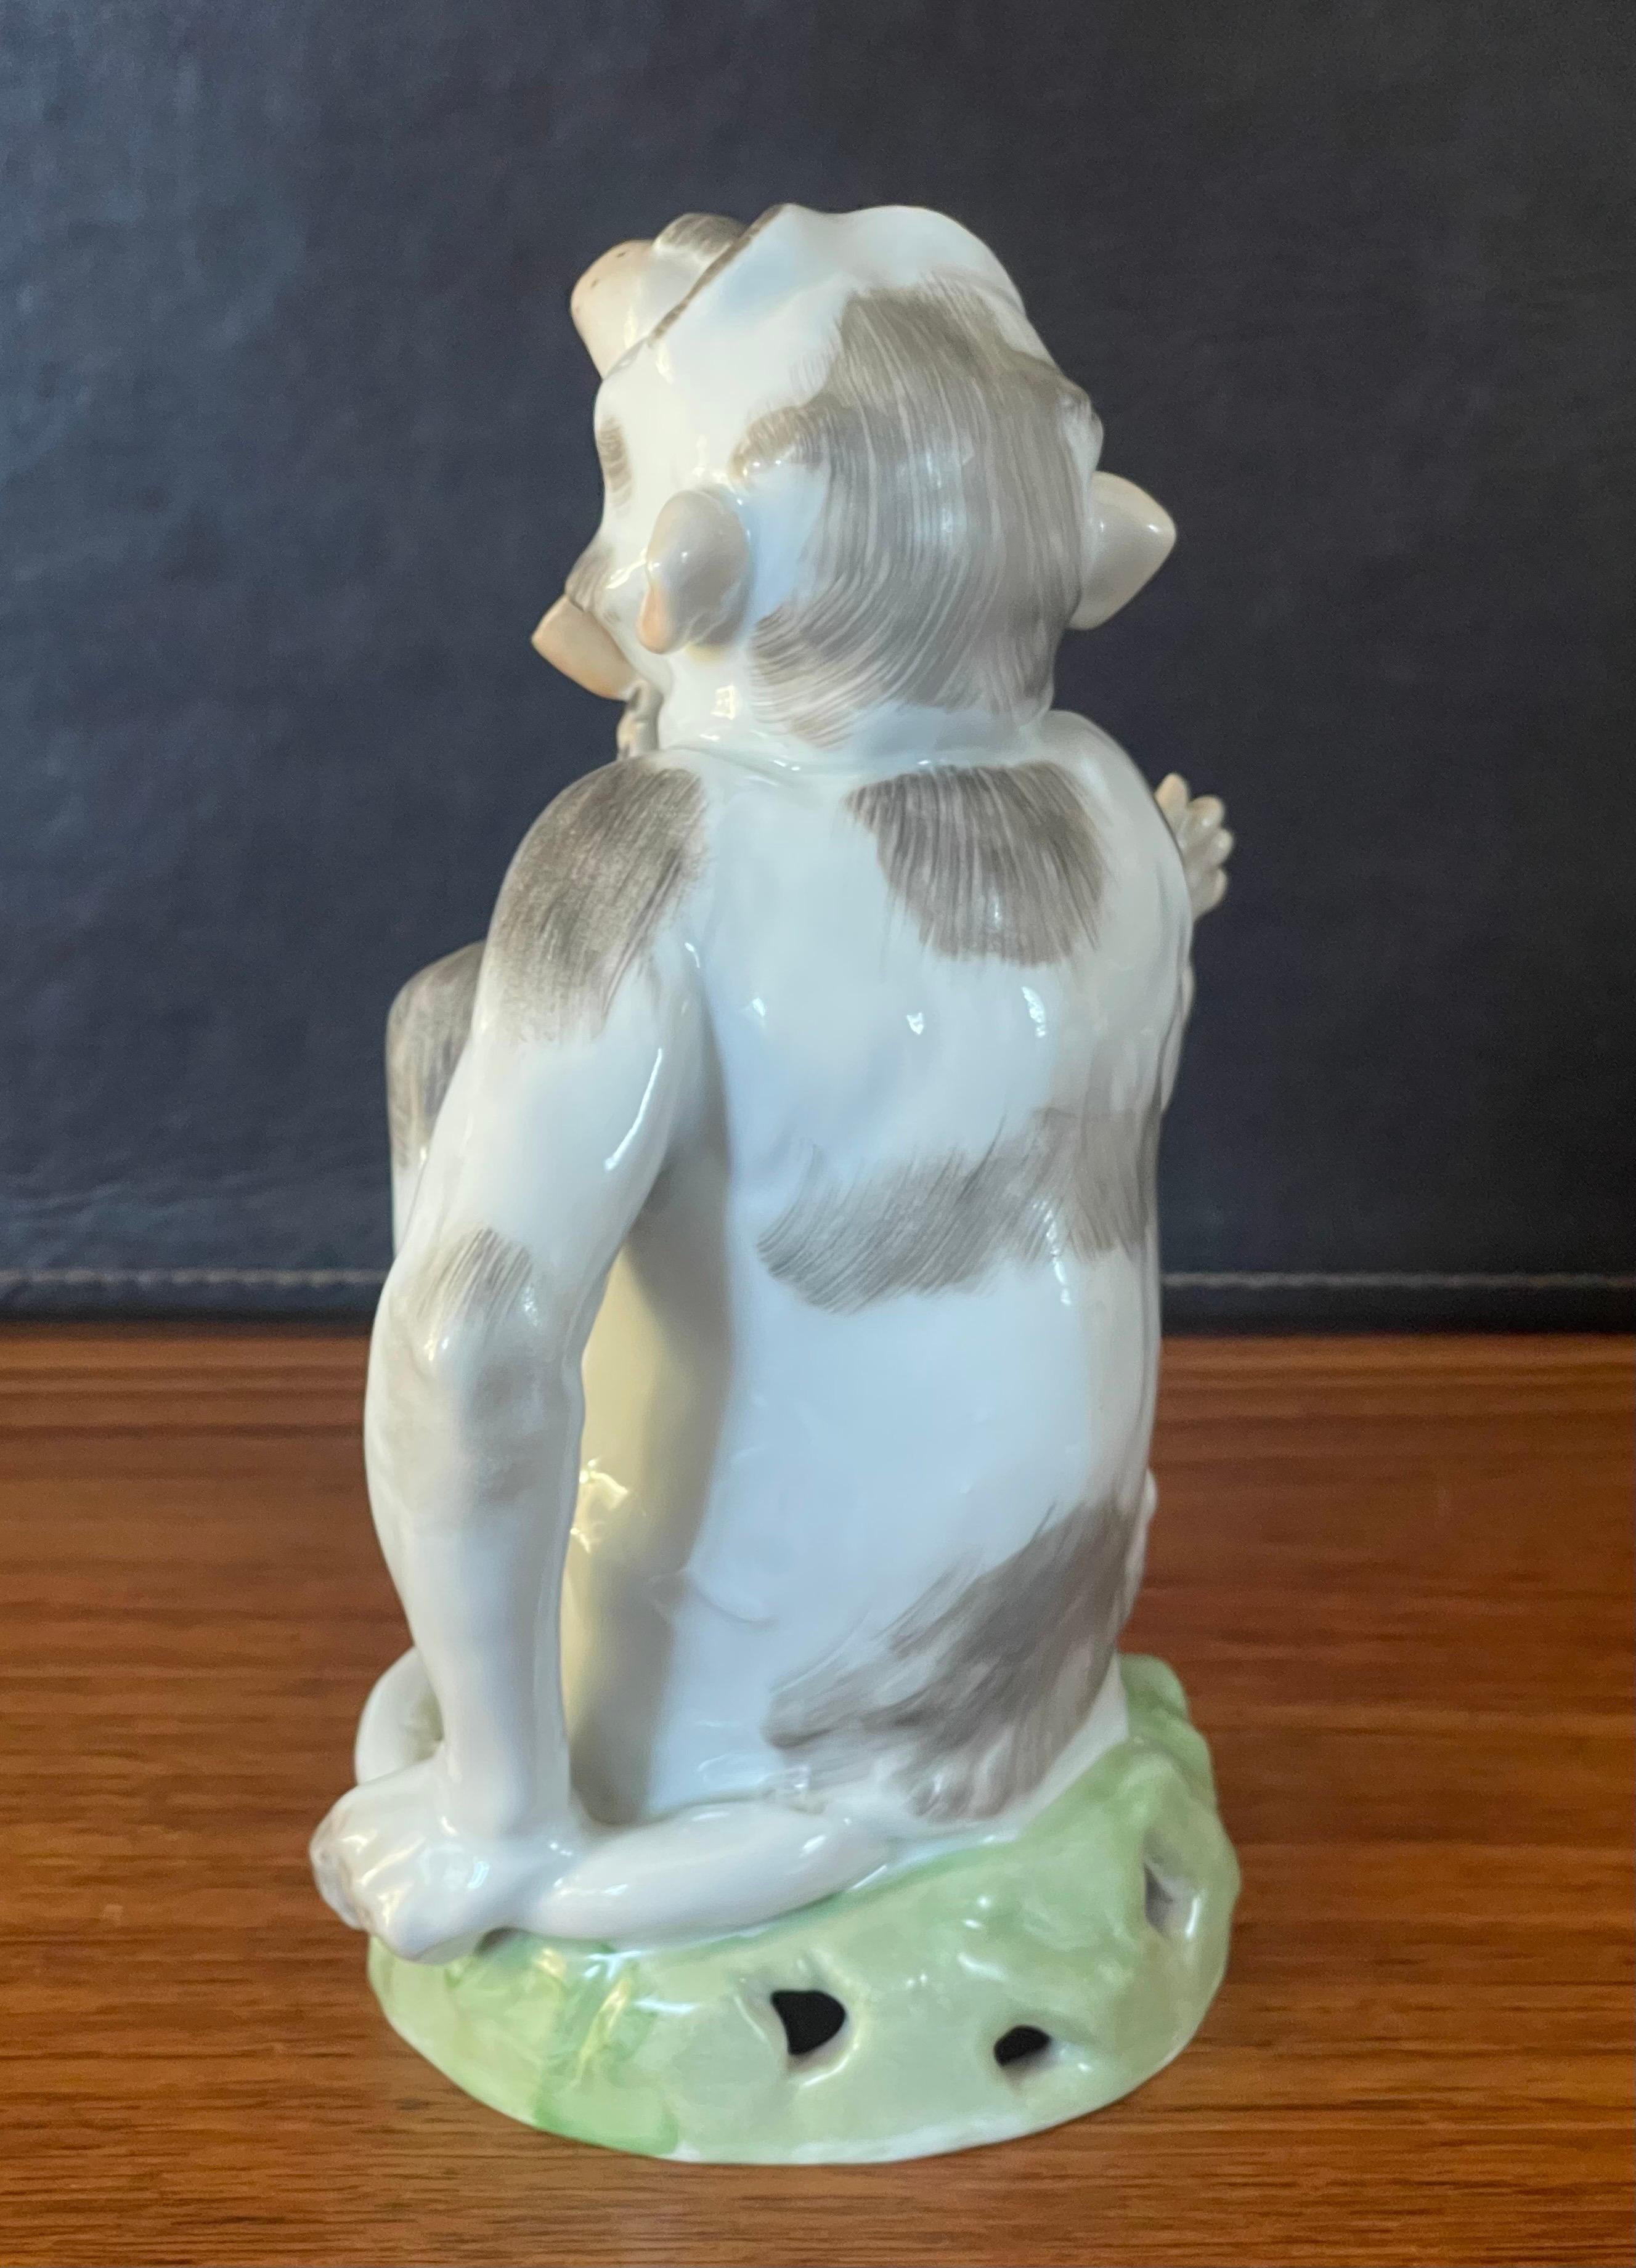 German Porcelain Smoking Monkey with Pipe by Carl Thieme for Dresden